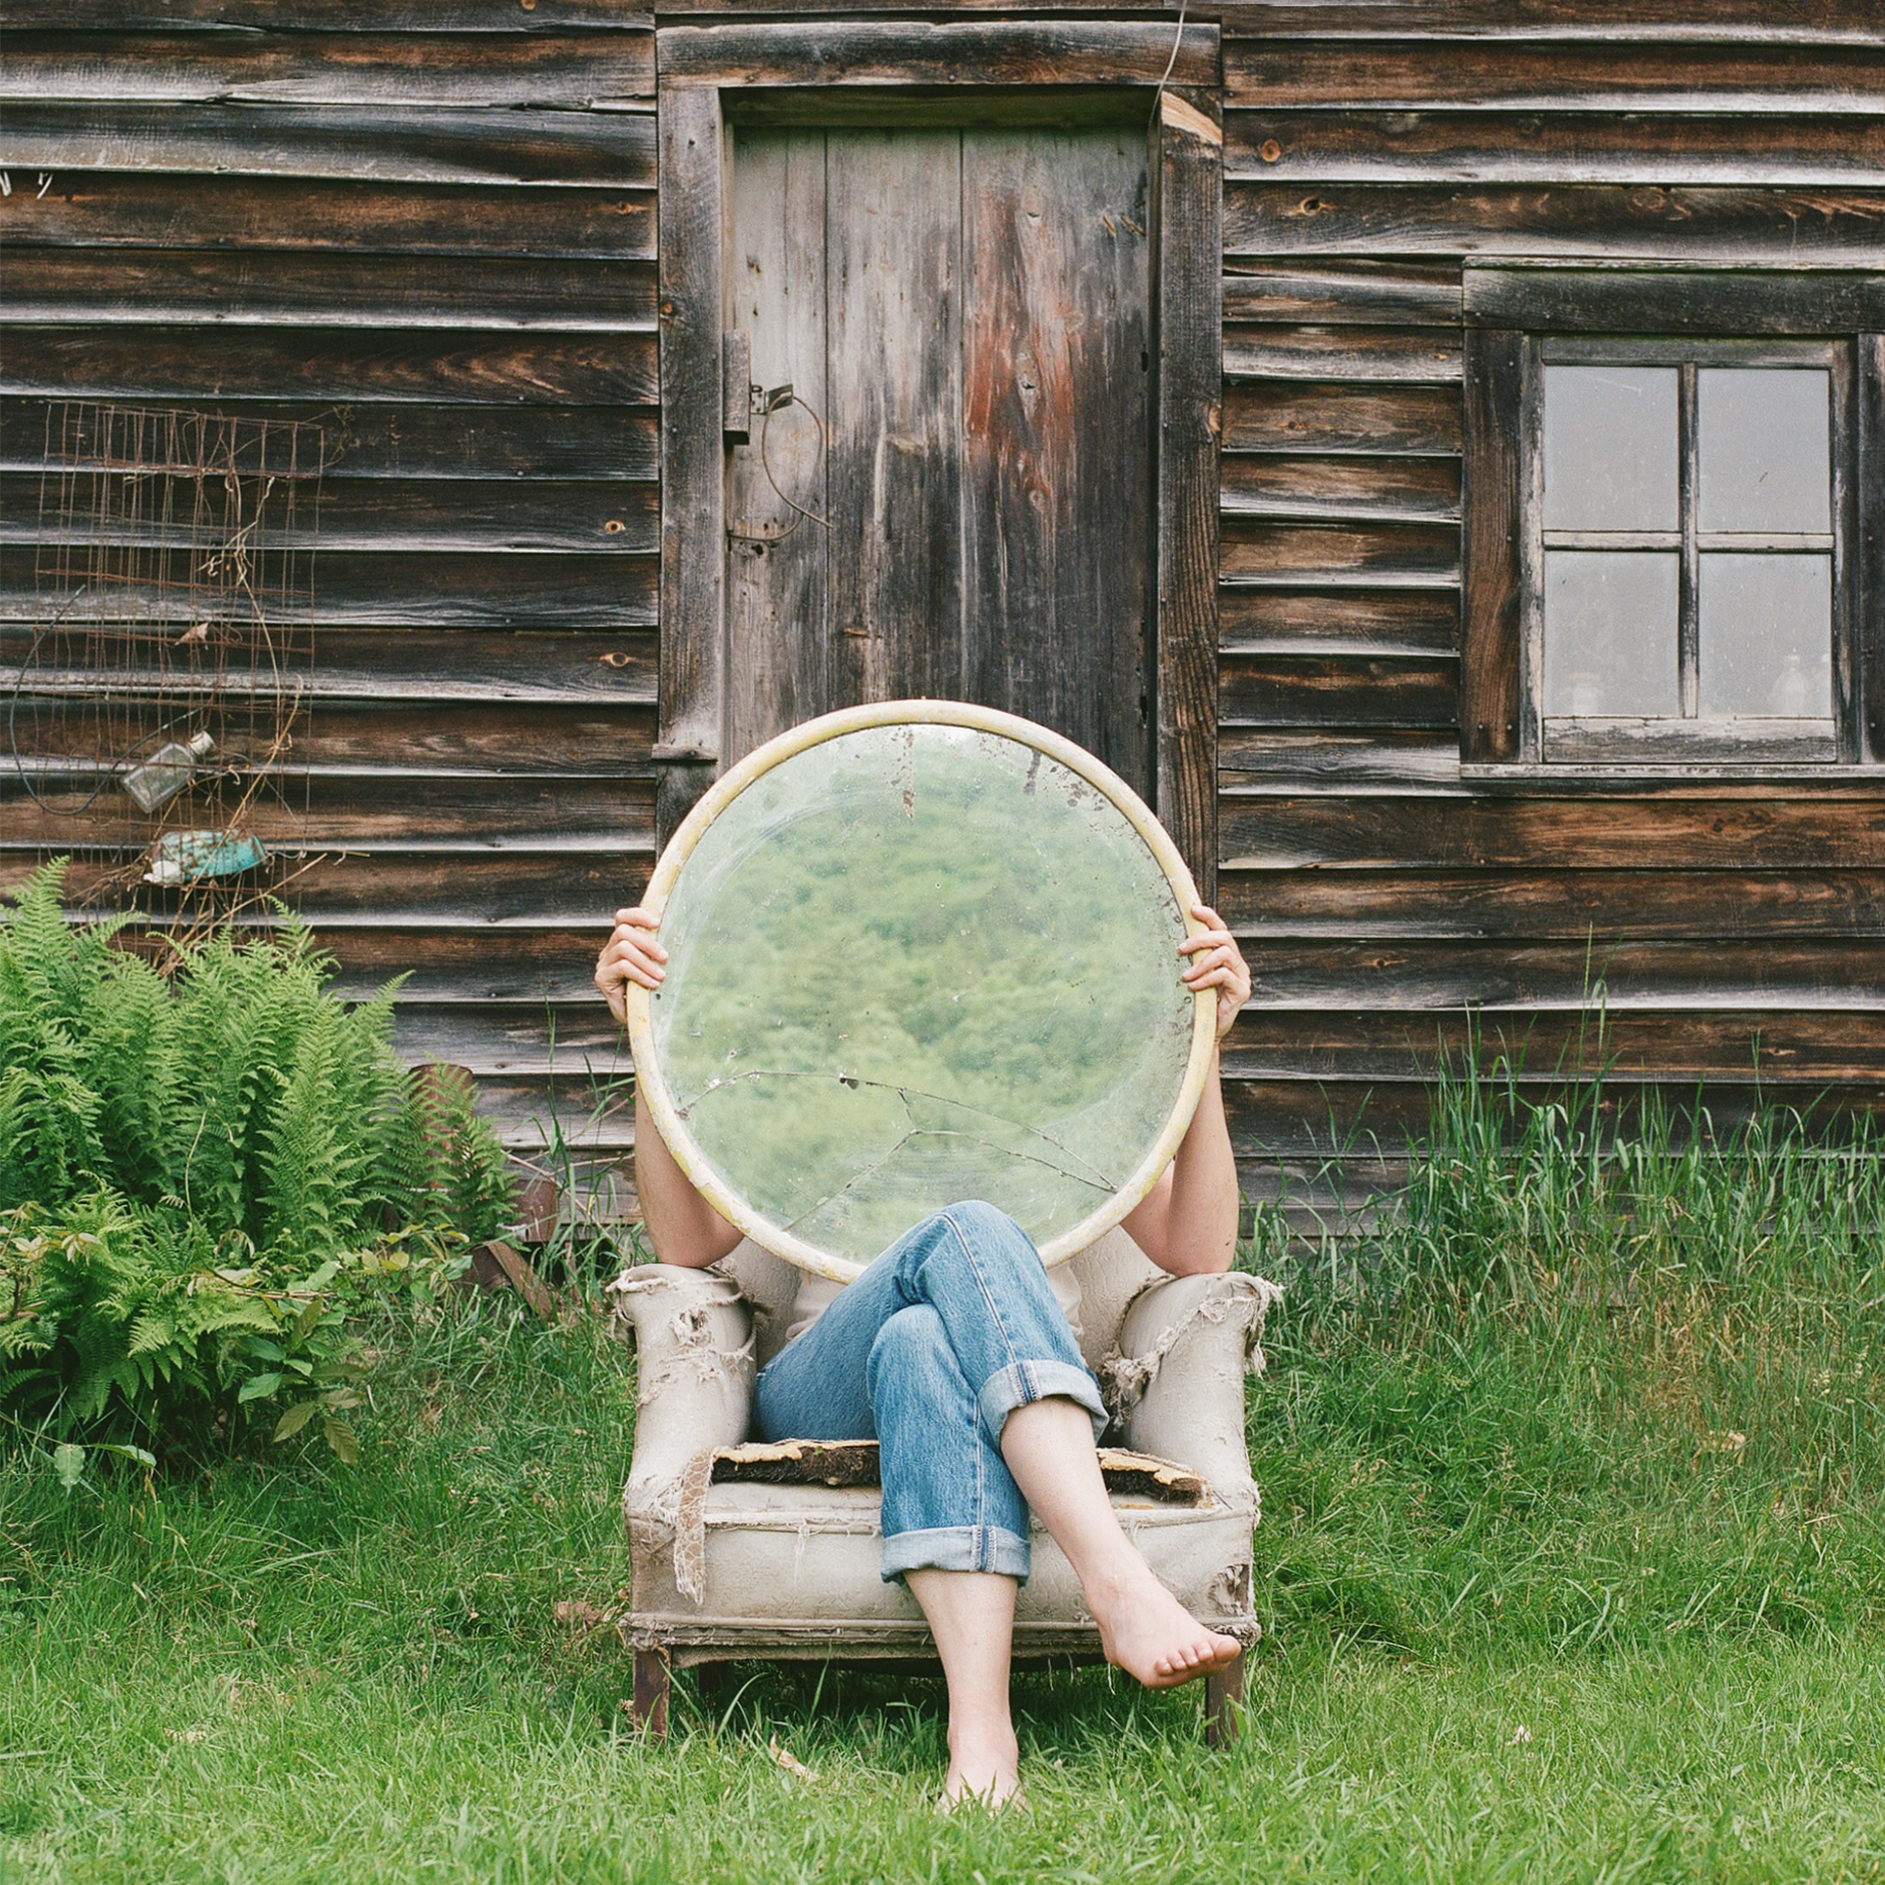 person with round mirror on chair outdoors